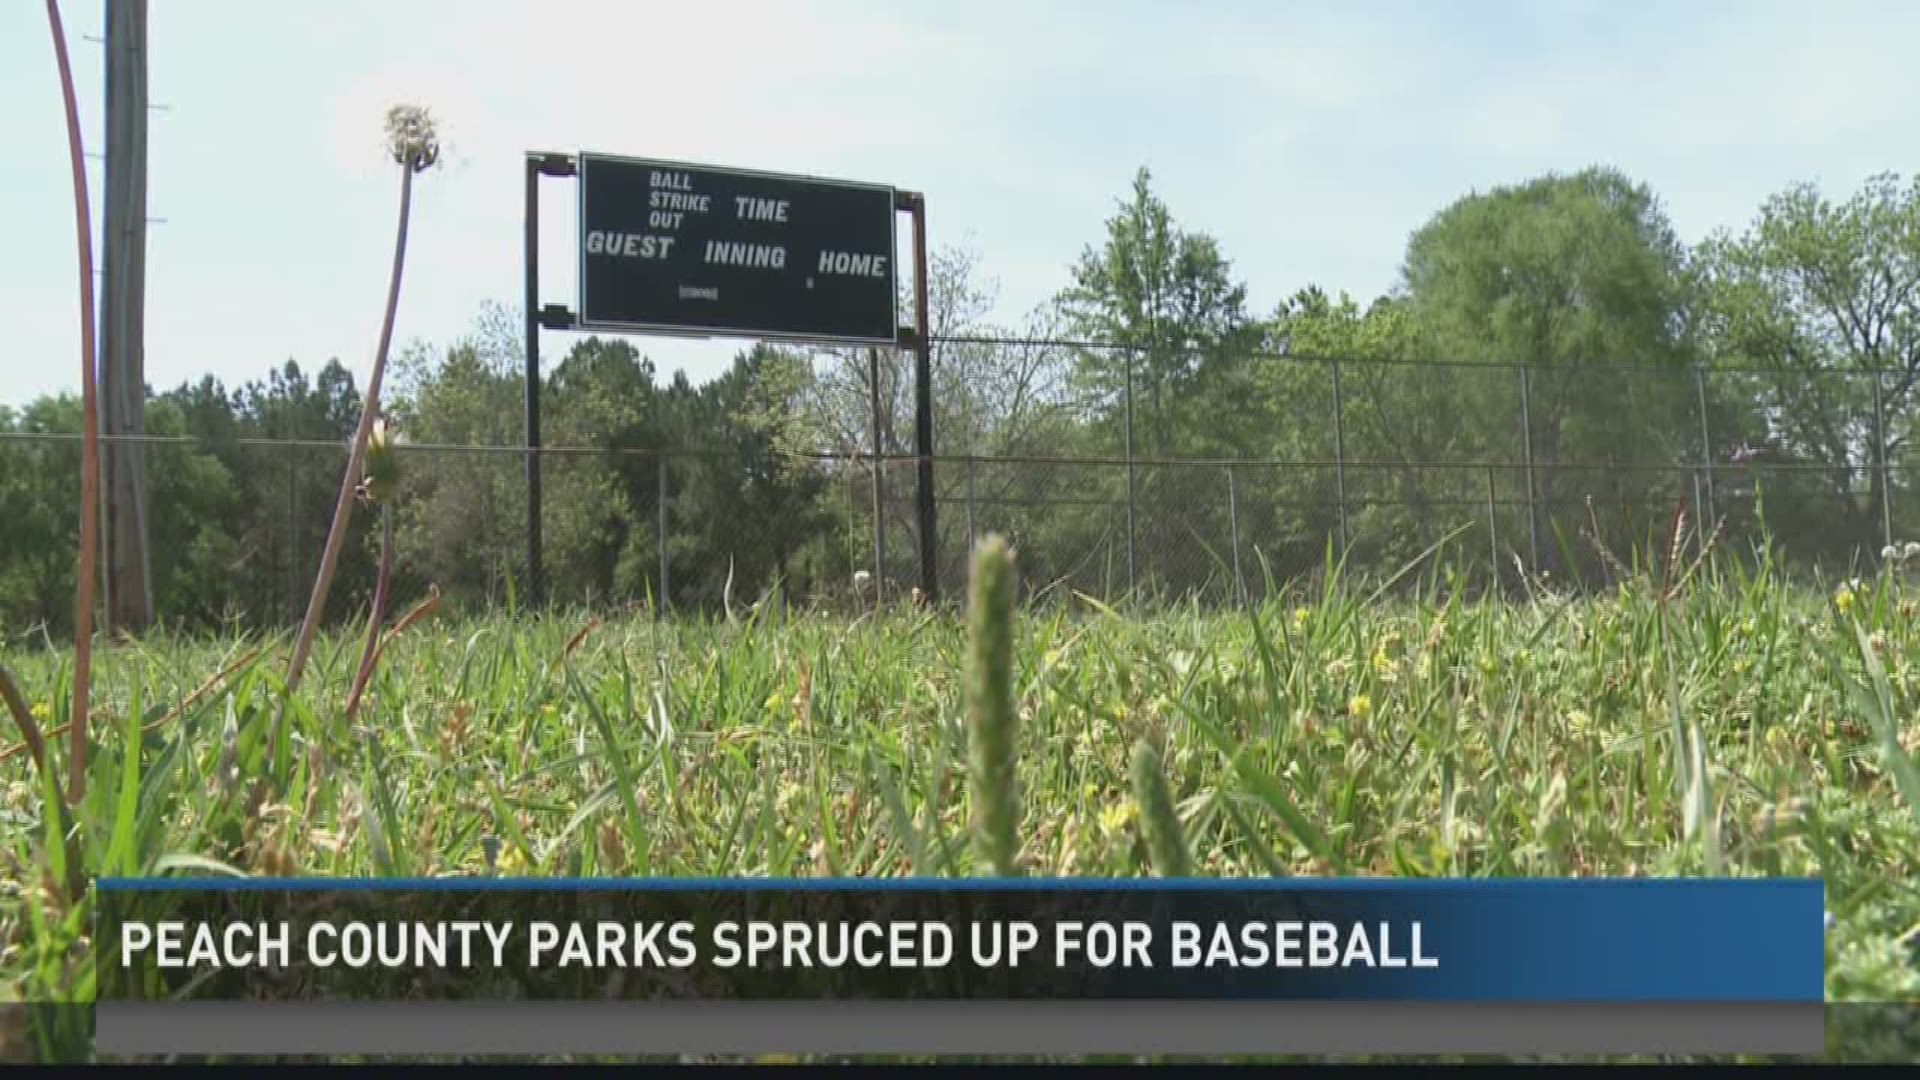 Peach County parks spruced up for baseball